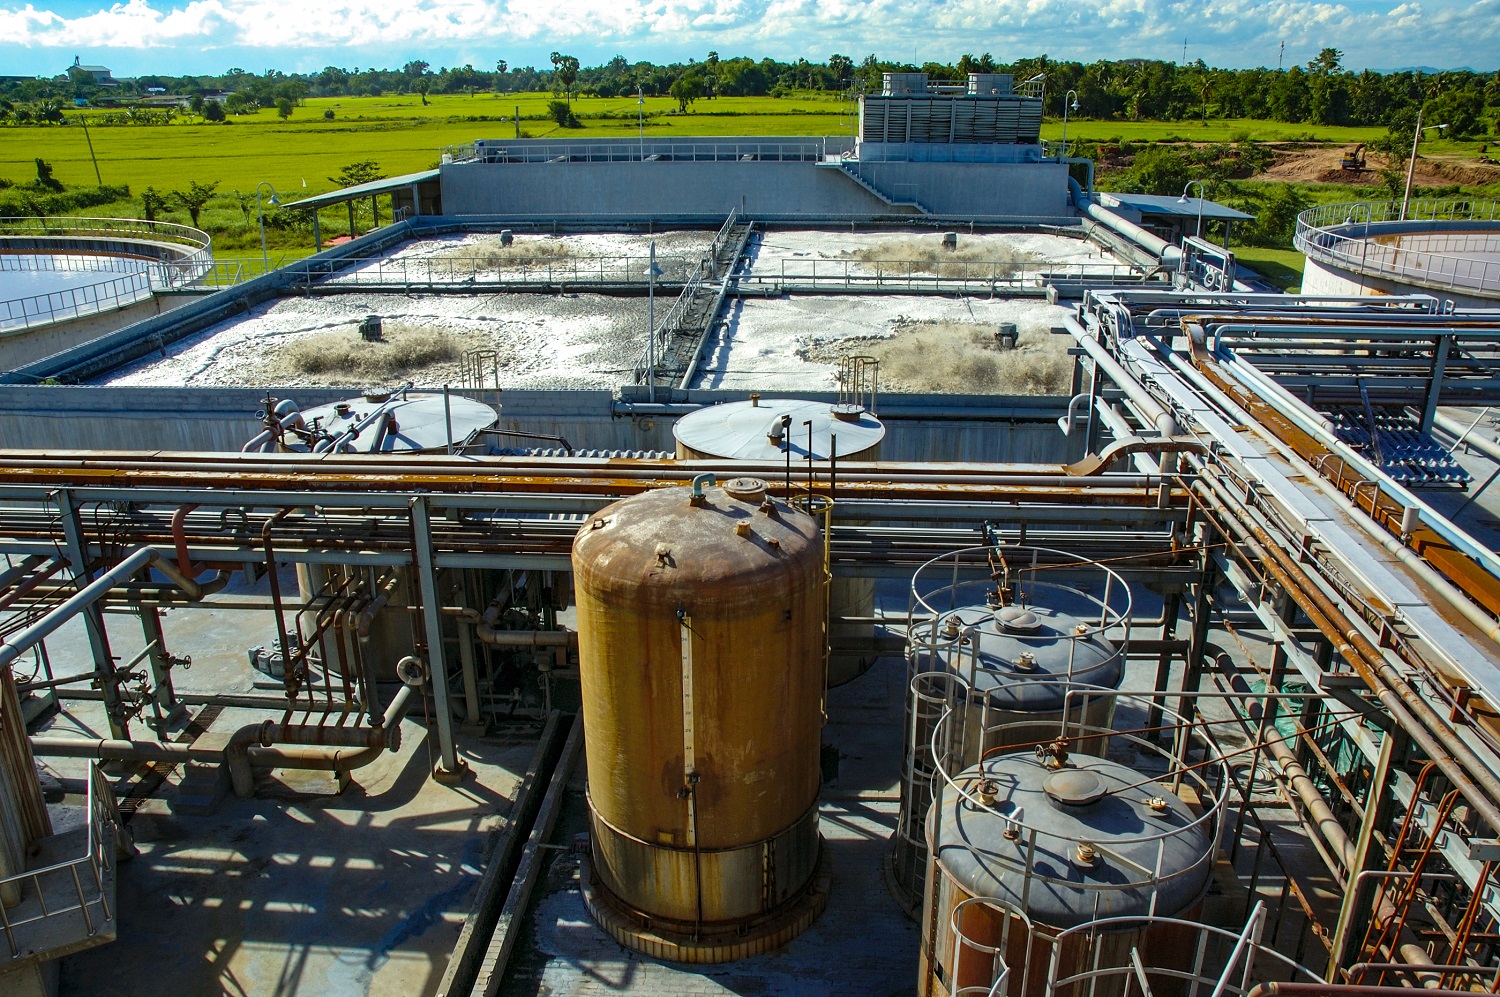 A wastewater treatment plant allows the recycling and re-use of water and is especially beneficial for large-scale industries where water usage high.